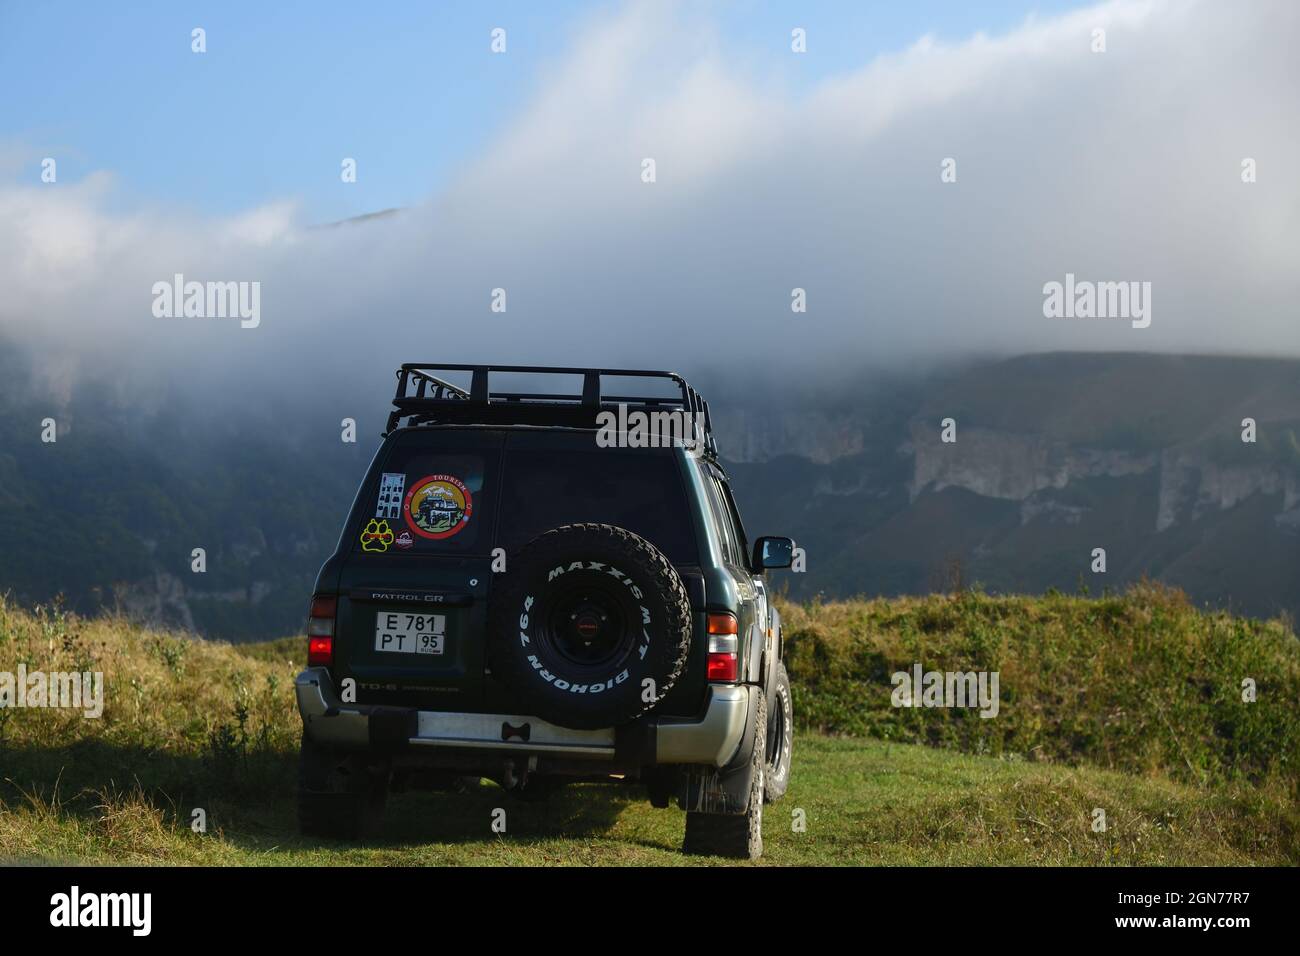 Chechnya, Russia - Sept 12, 2021: Off-road car shown in the Caucasus mountains. Vedeno district of the Chechen Republic. Extreme mountain safari is on Stock Photo